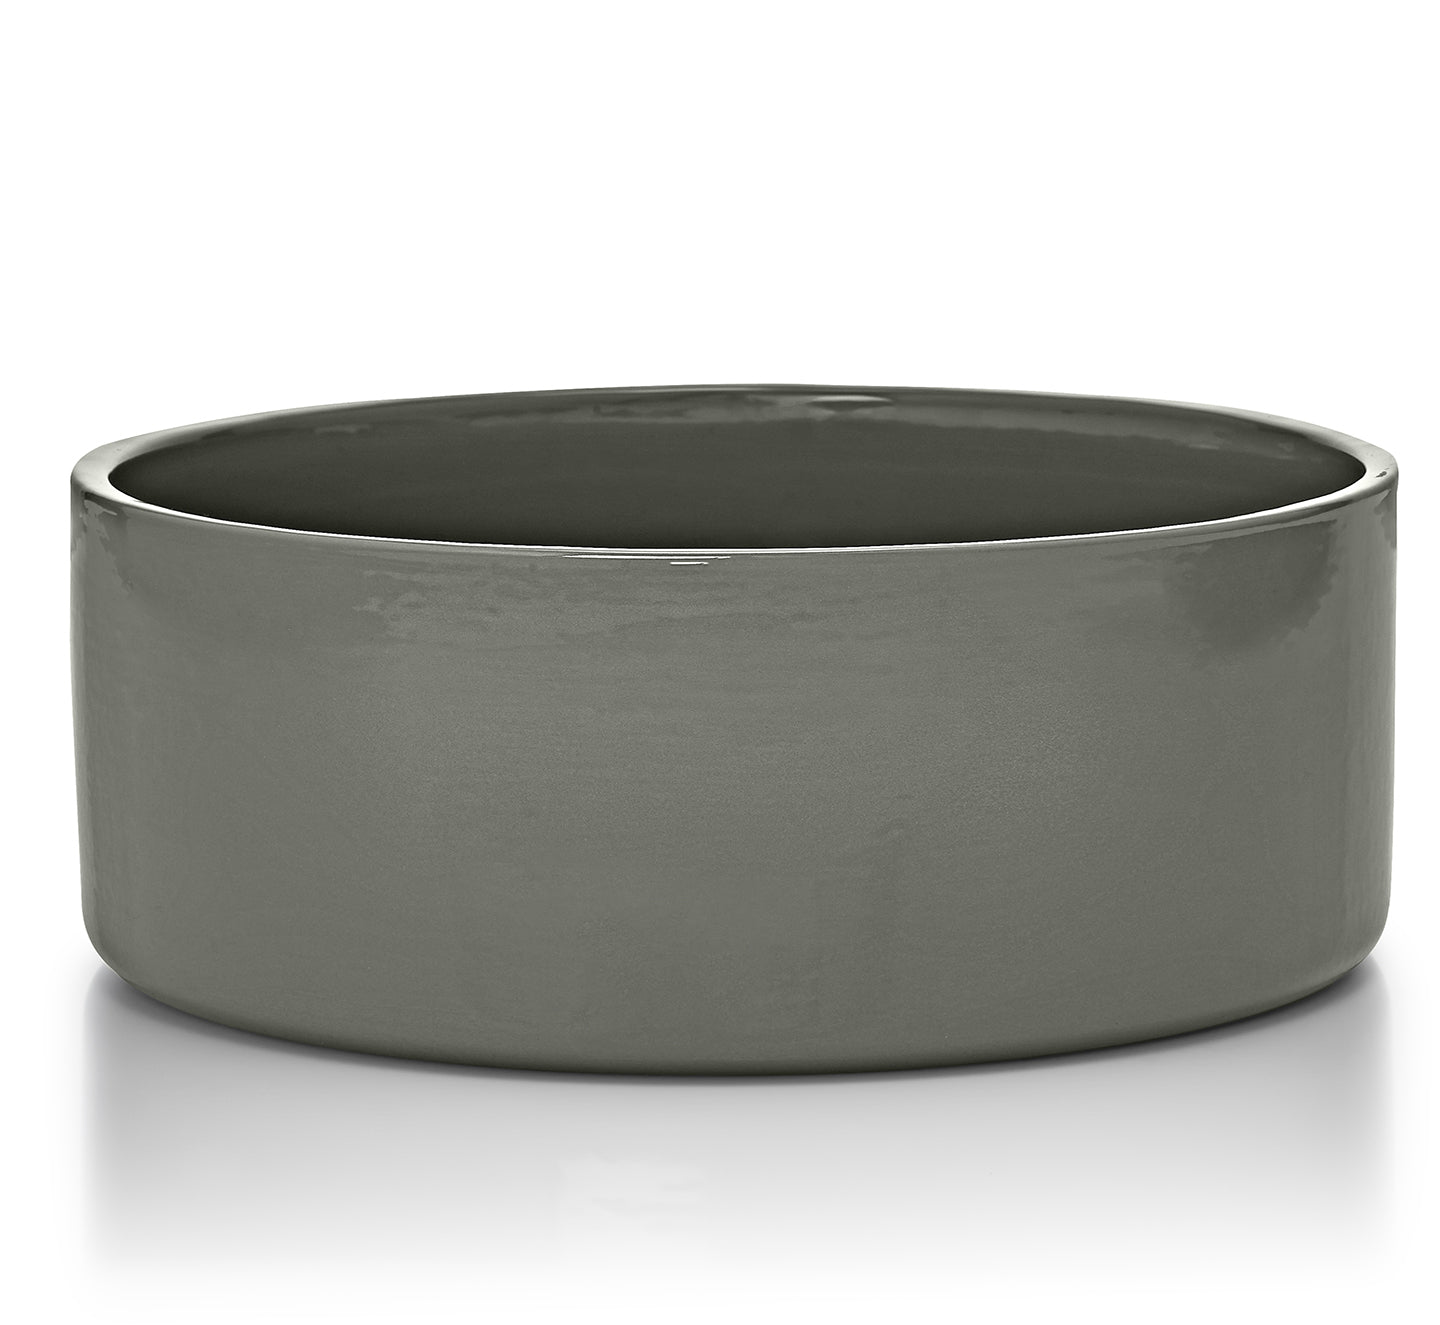 Non-toxic and durable Scodella Dog Bowl Porcelain for pets with allergies